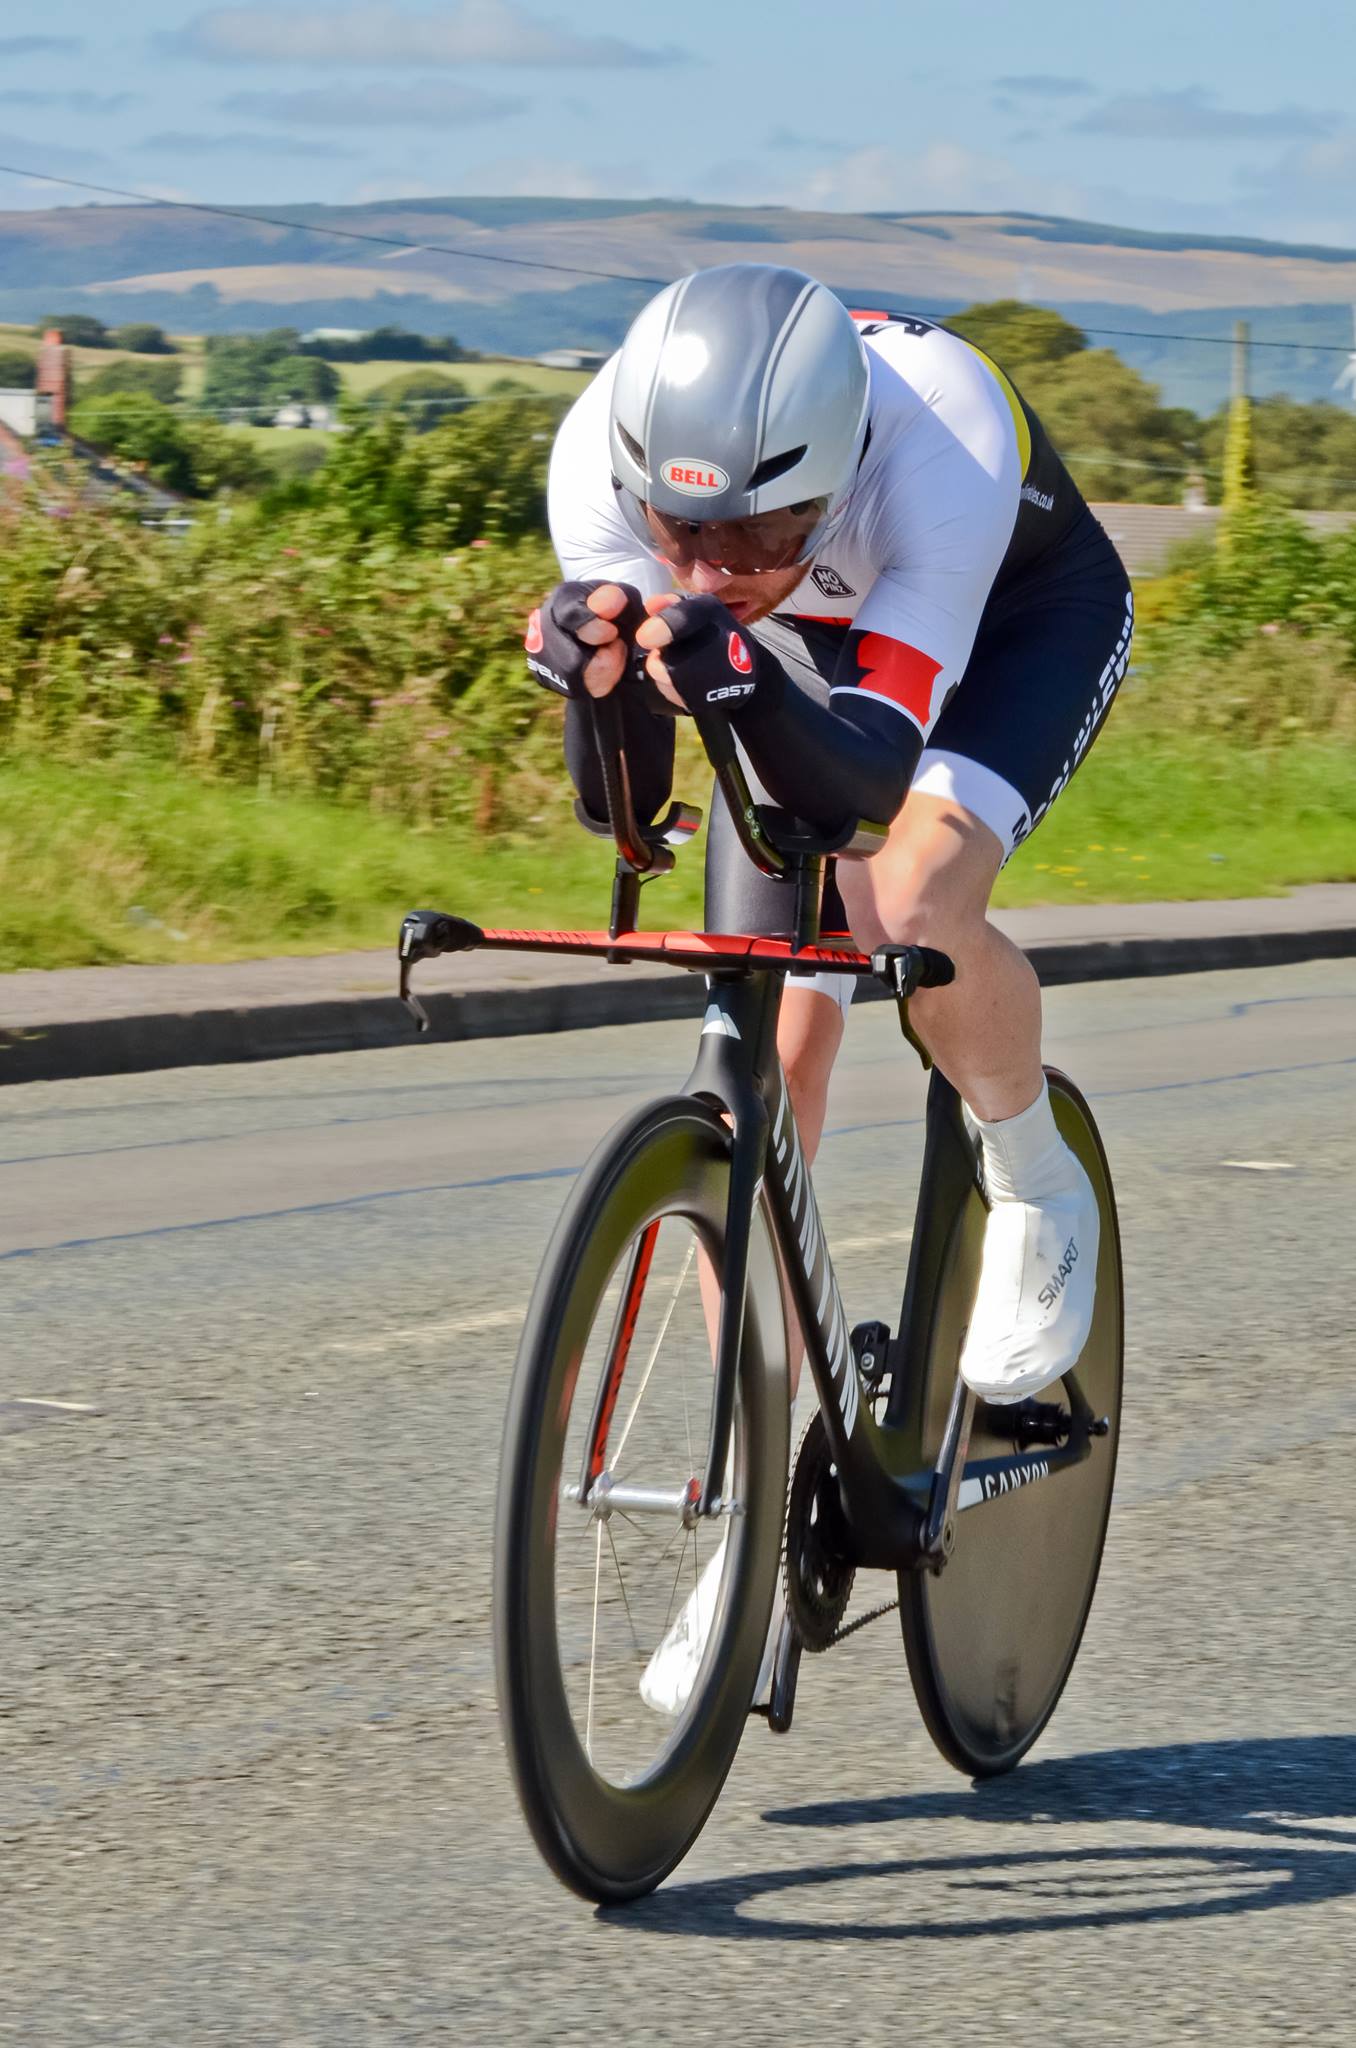 Race Report – S100/50 TT – Conrad takes another win!